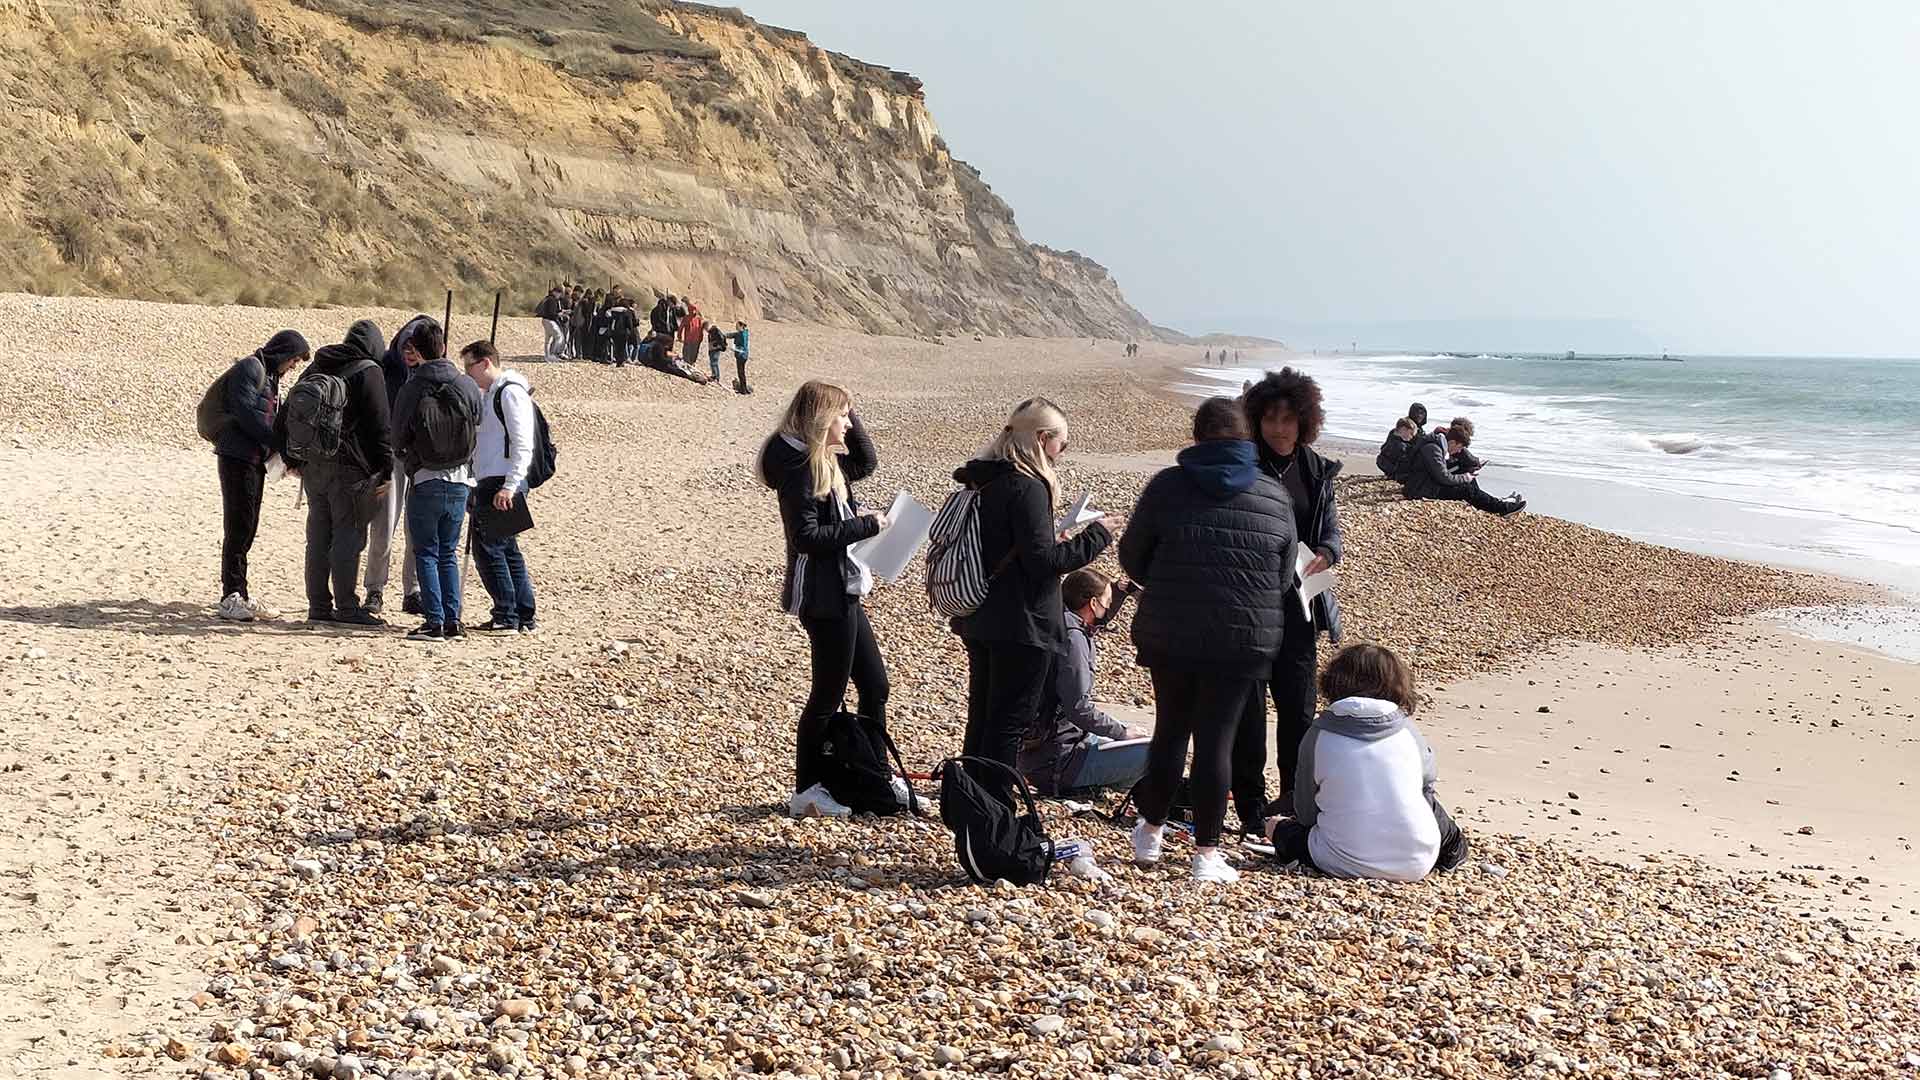 A-level Geography students conduct fieldwork on Bournemouth Beach